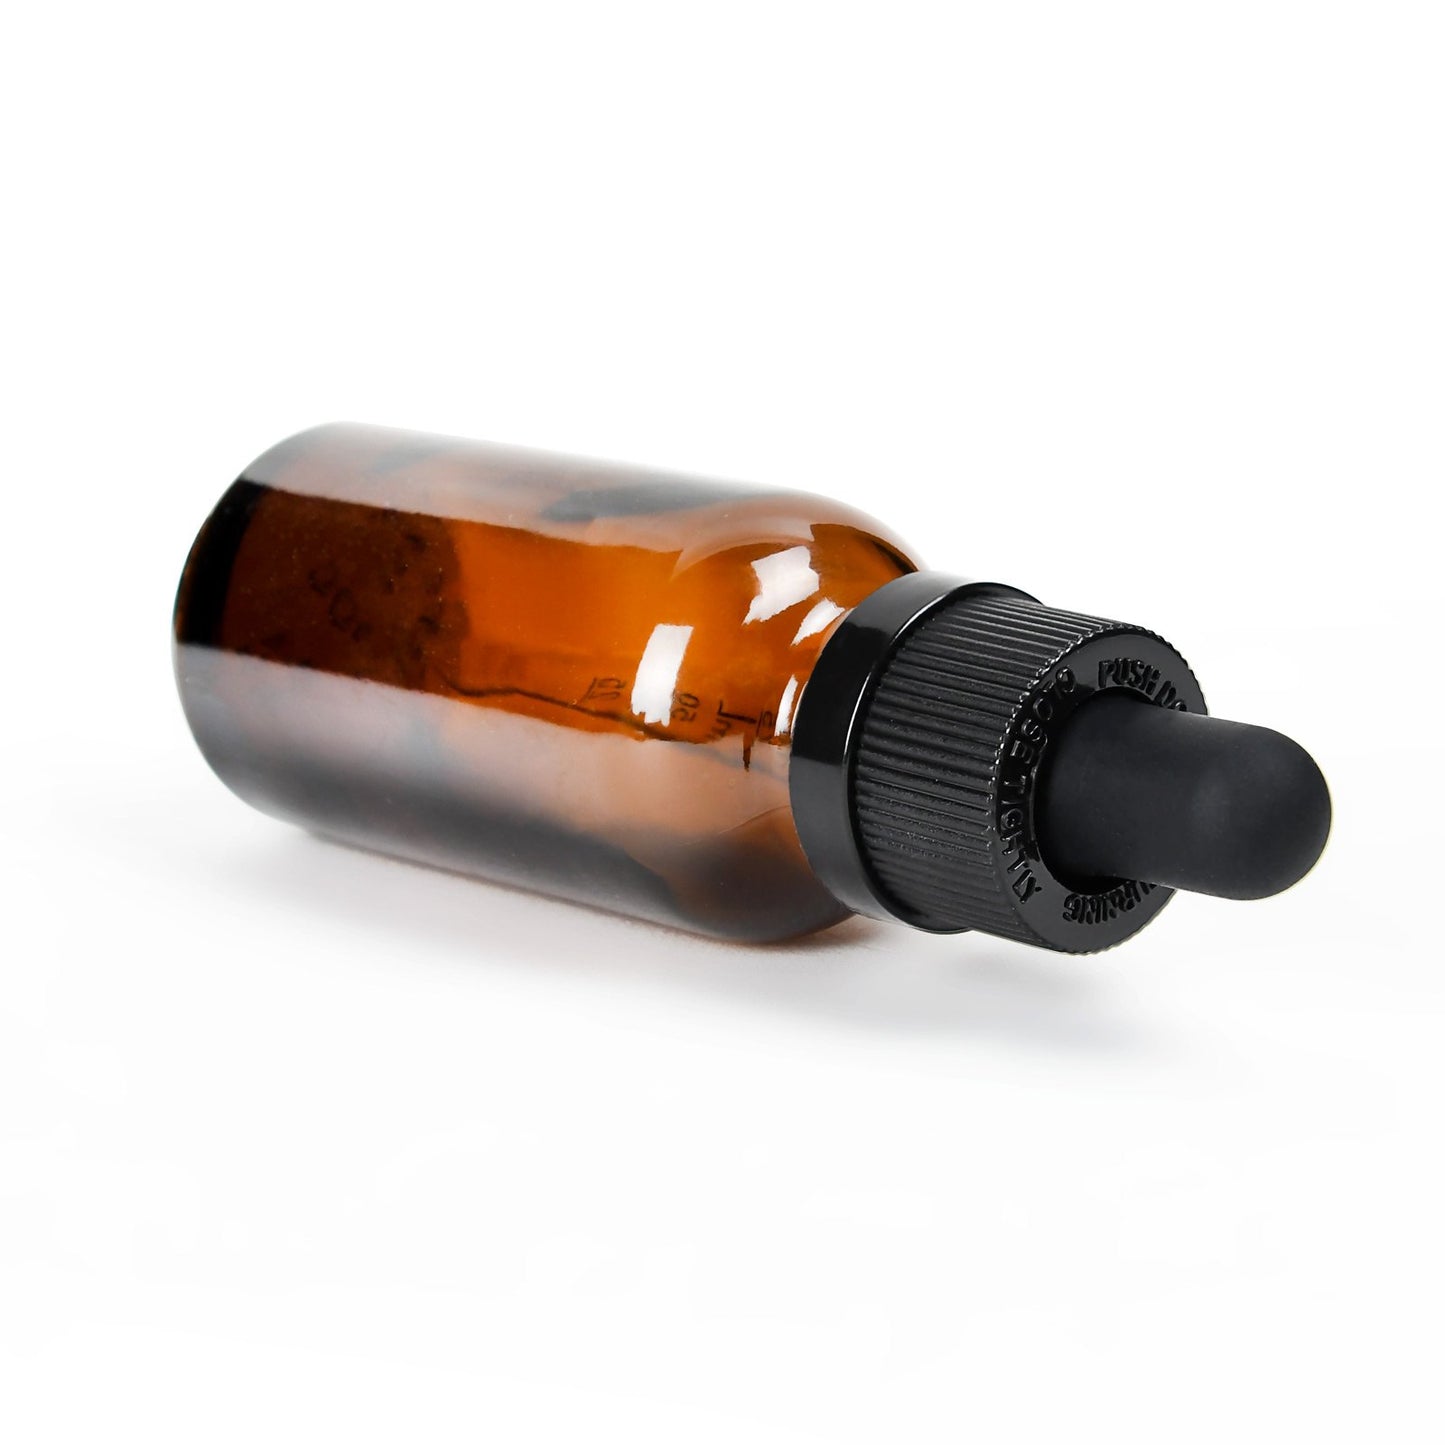 30ML / 1OZ Amber Glass Tincture Dropper Bottles 110 COUNT